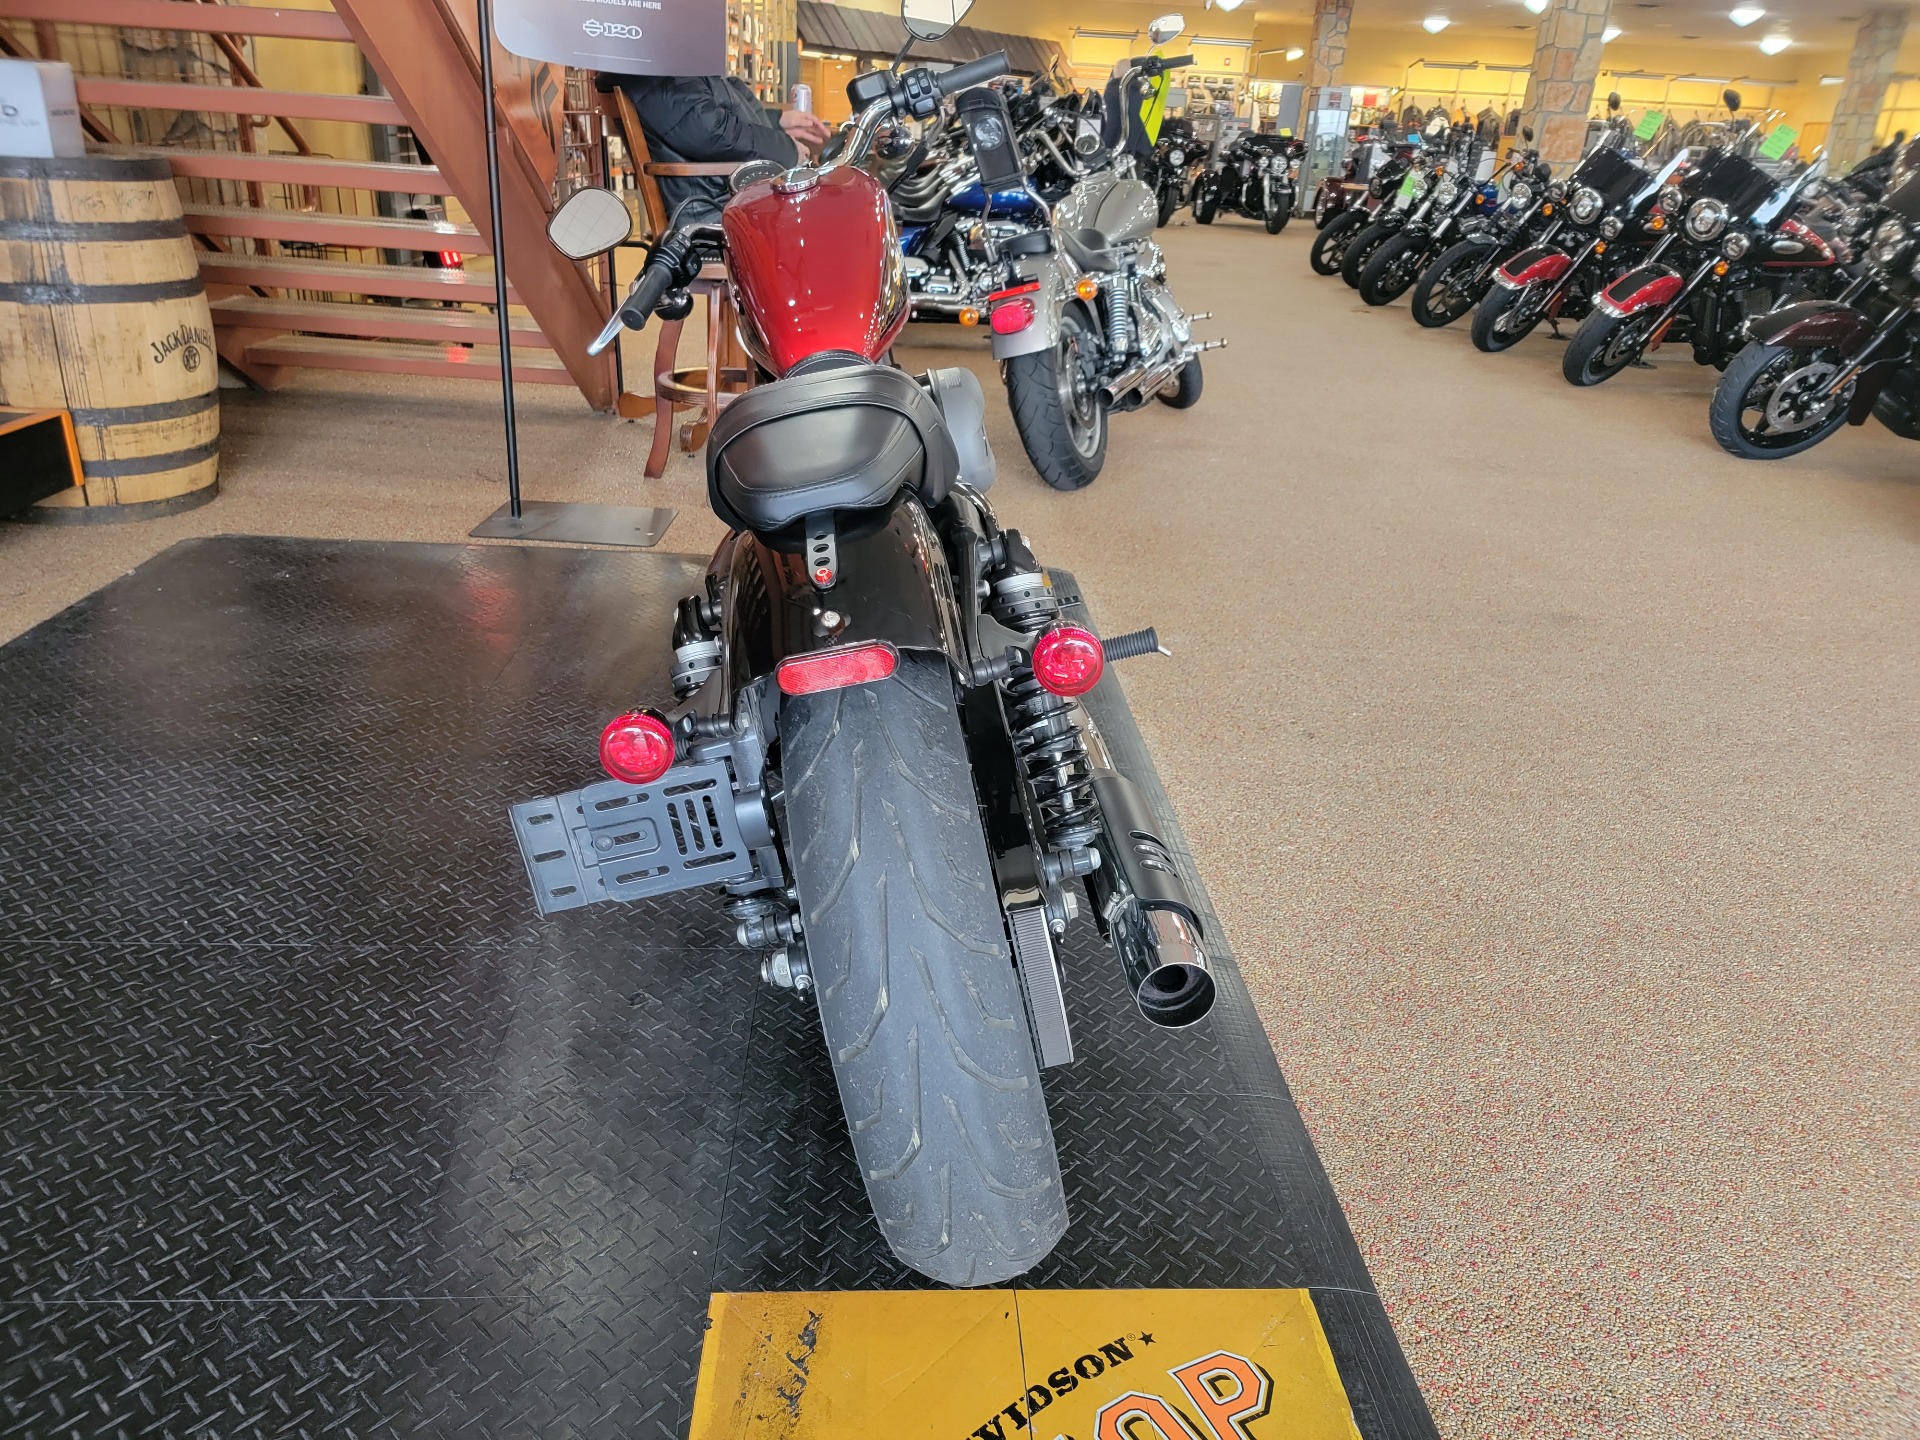 2019 Harley-Davidson Roadster™ in Knoxville, Tennessee - Photo 3